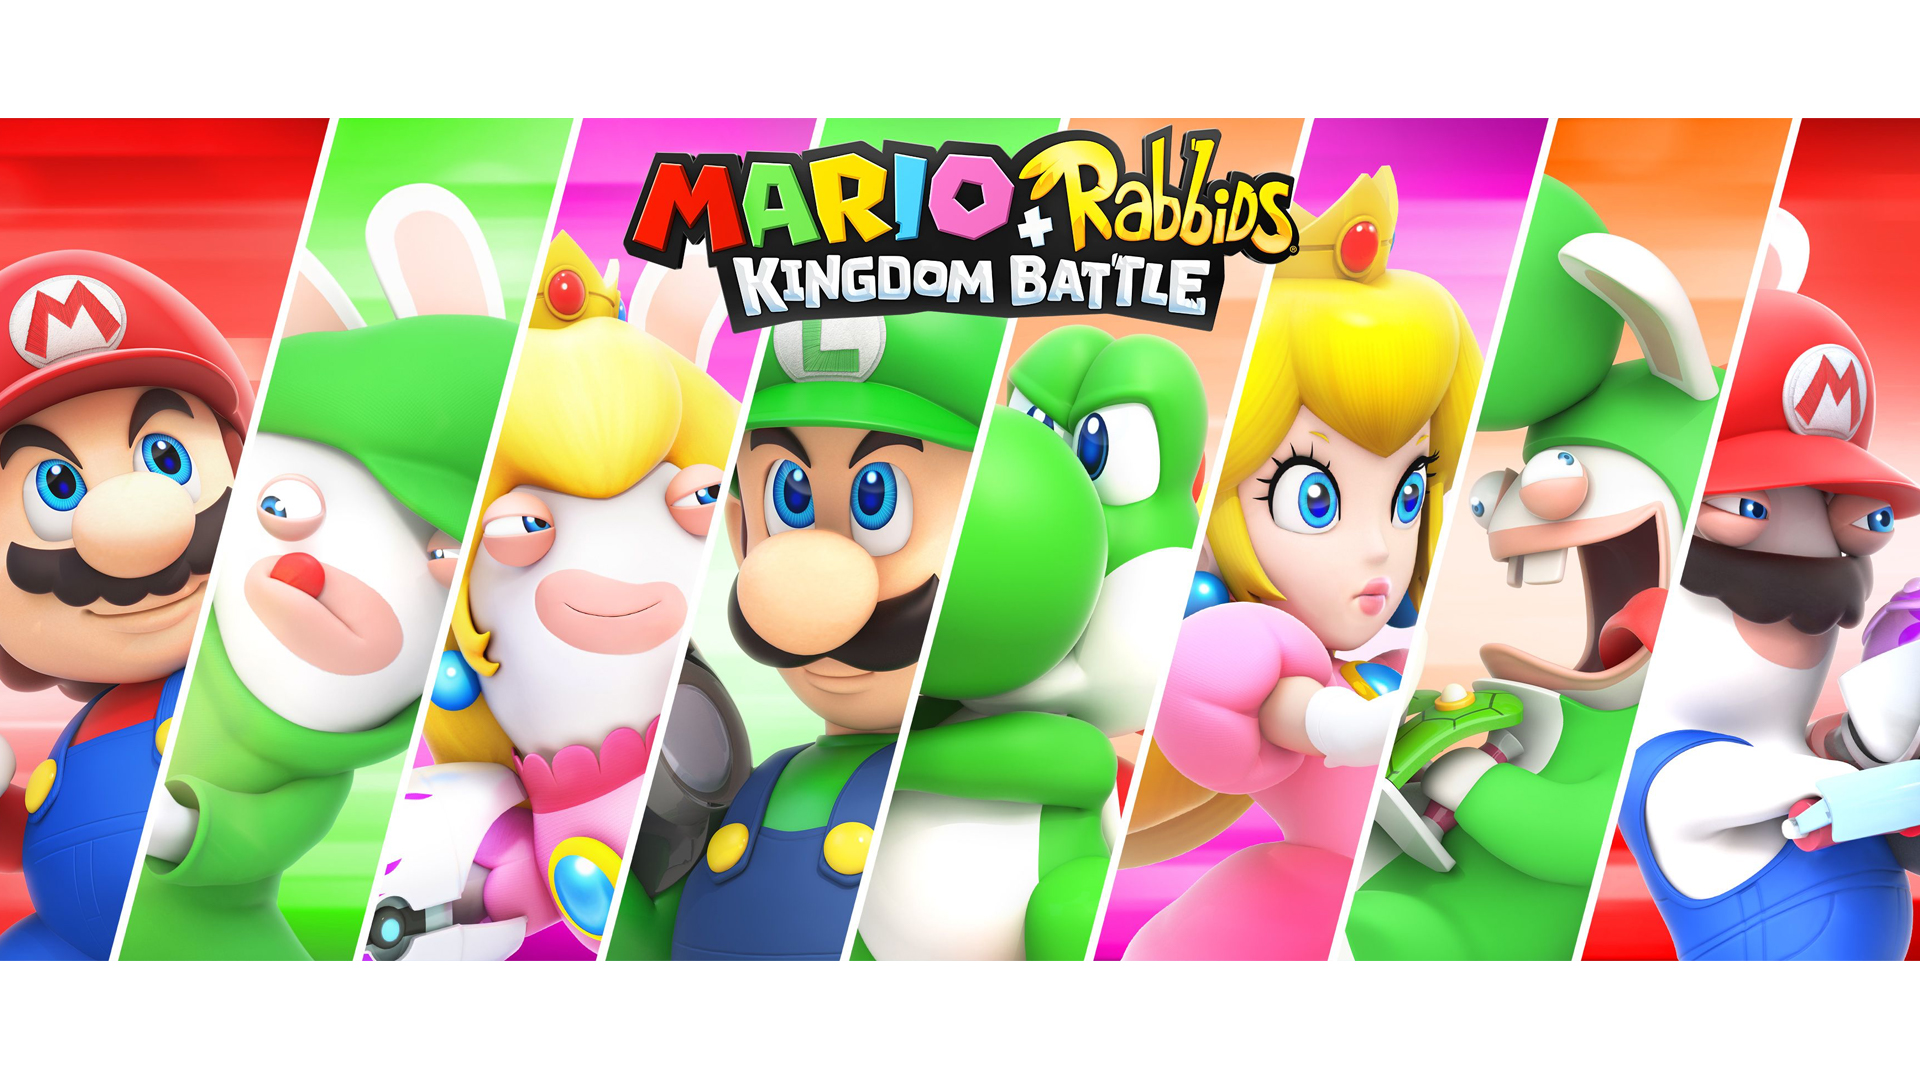 Mario rabbids kingdom battle hd papers and backgrounds